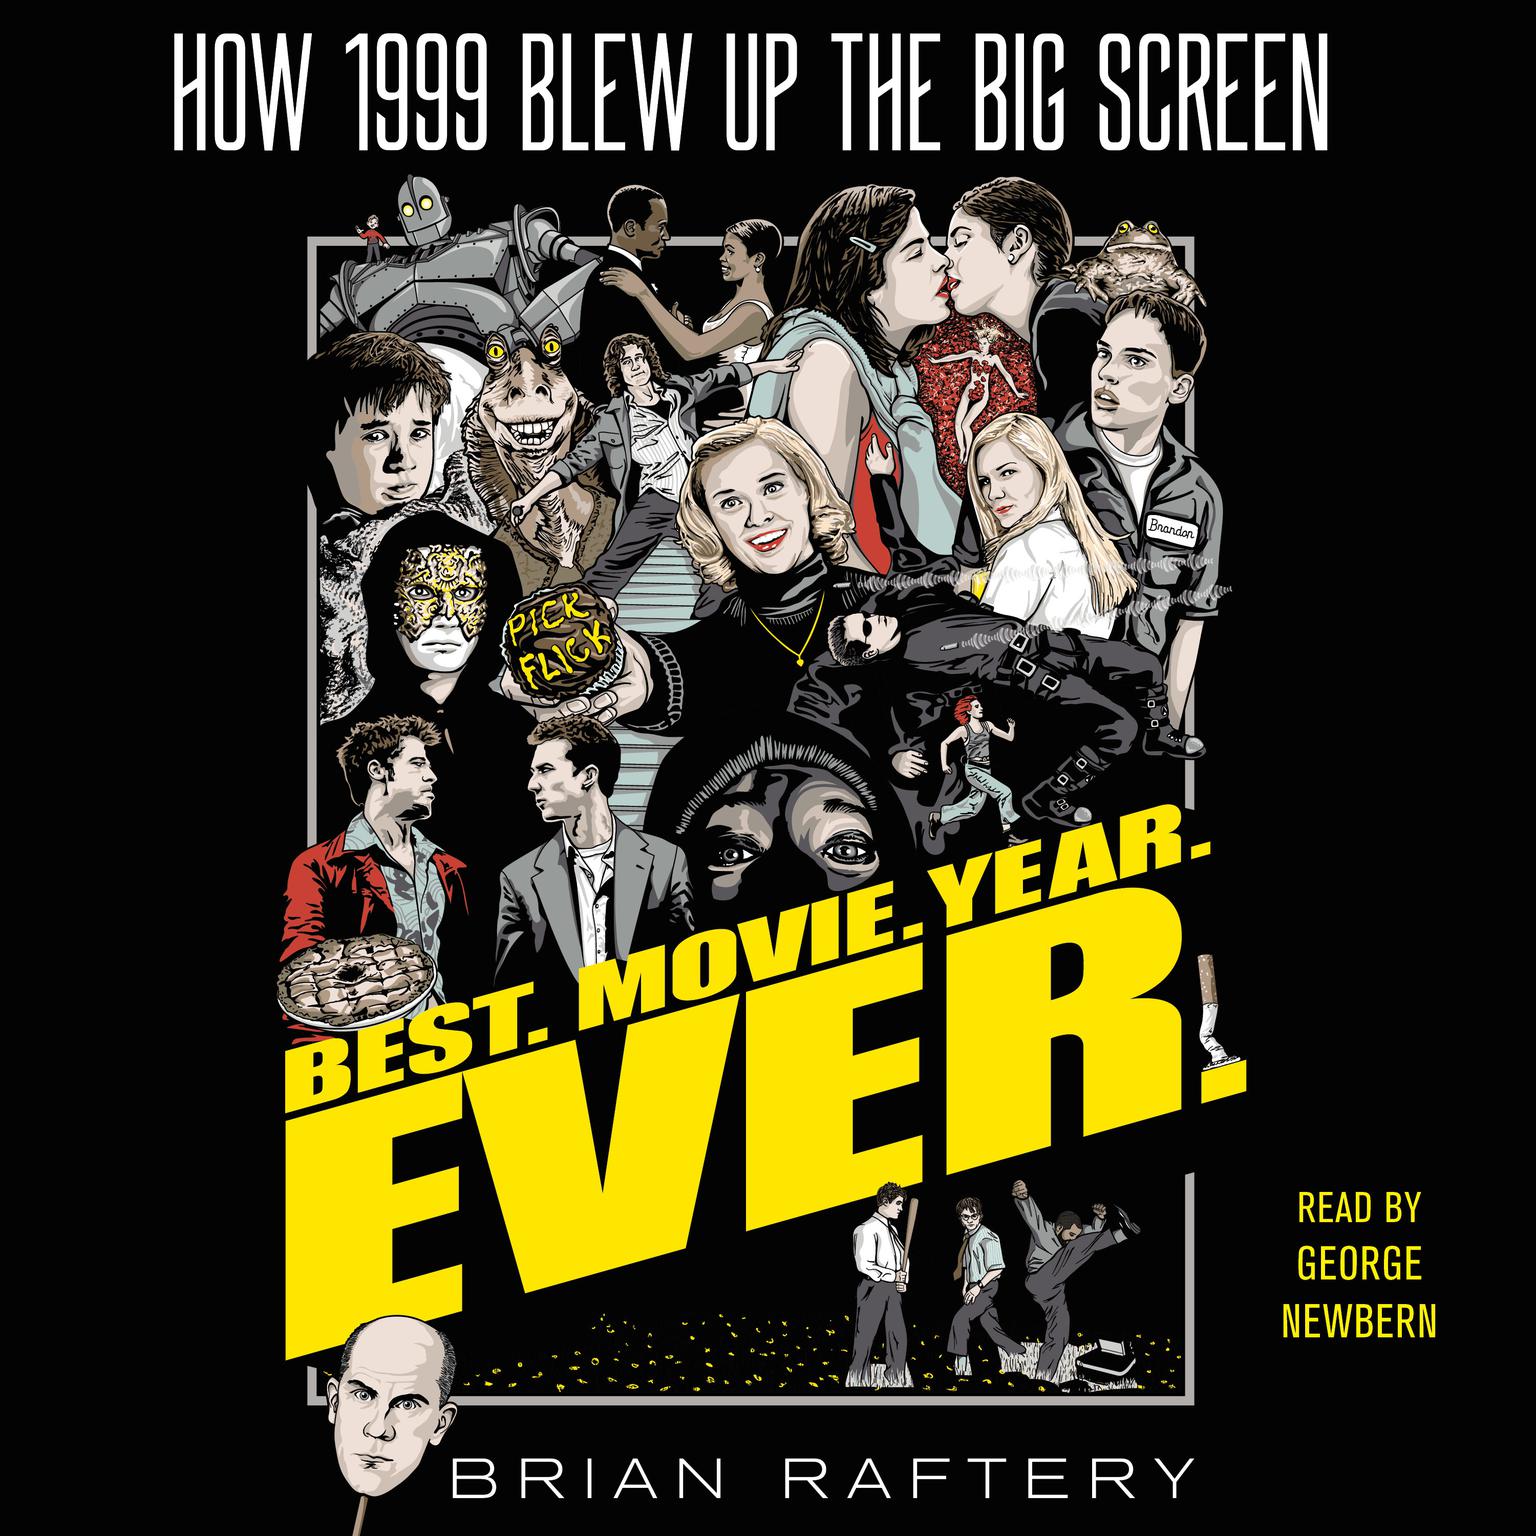 Best. Movie. Year. Ever.: How 1999 Blew Up the Big Screen Audiobook, by Brian Raftery